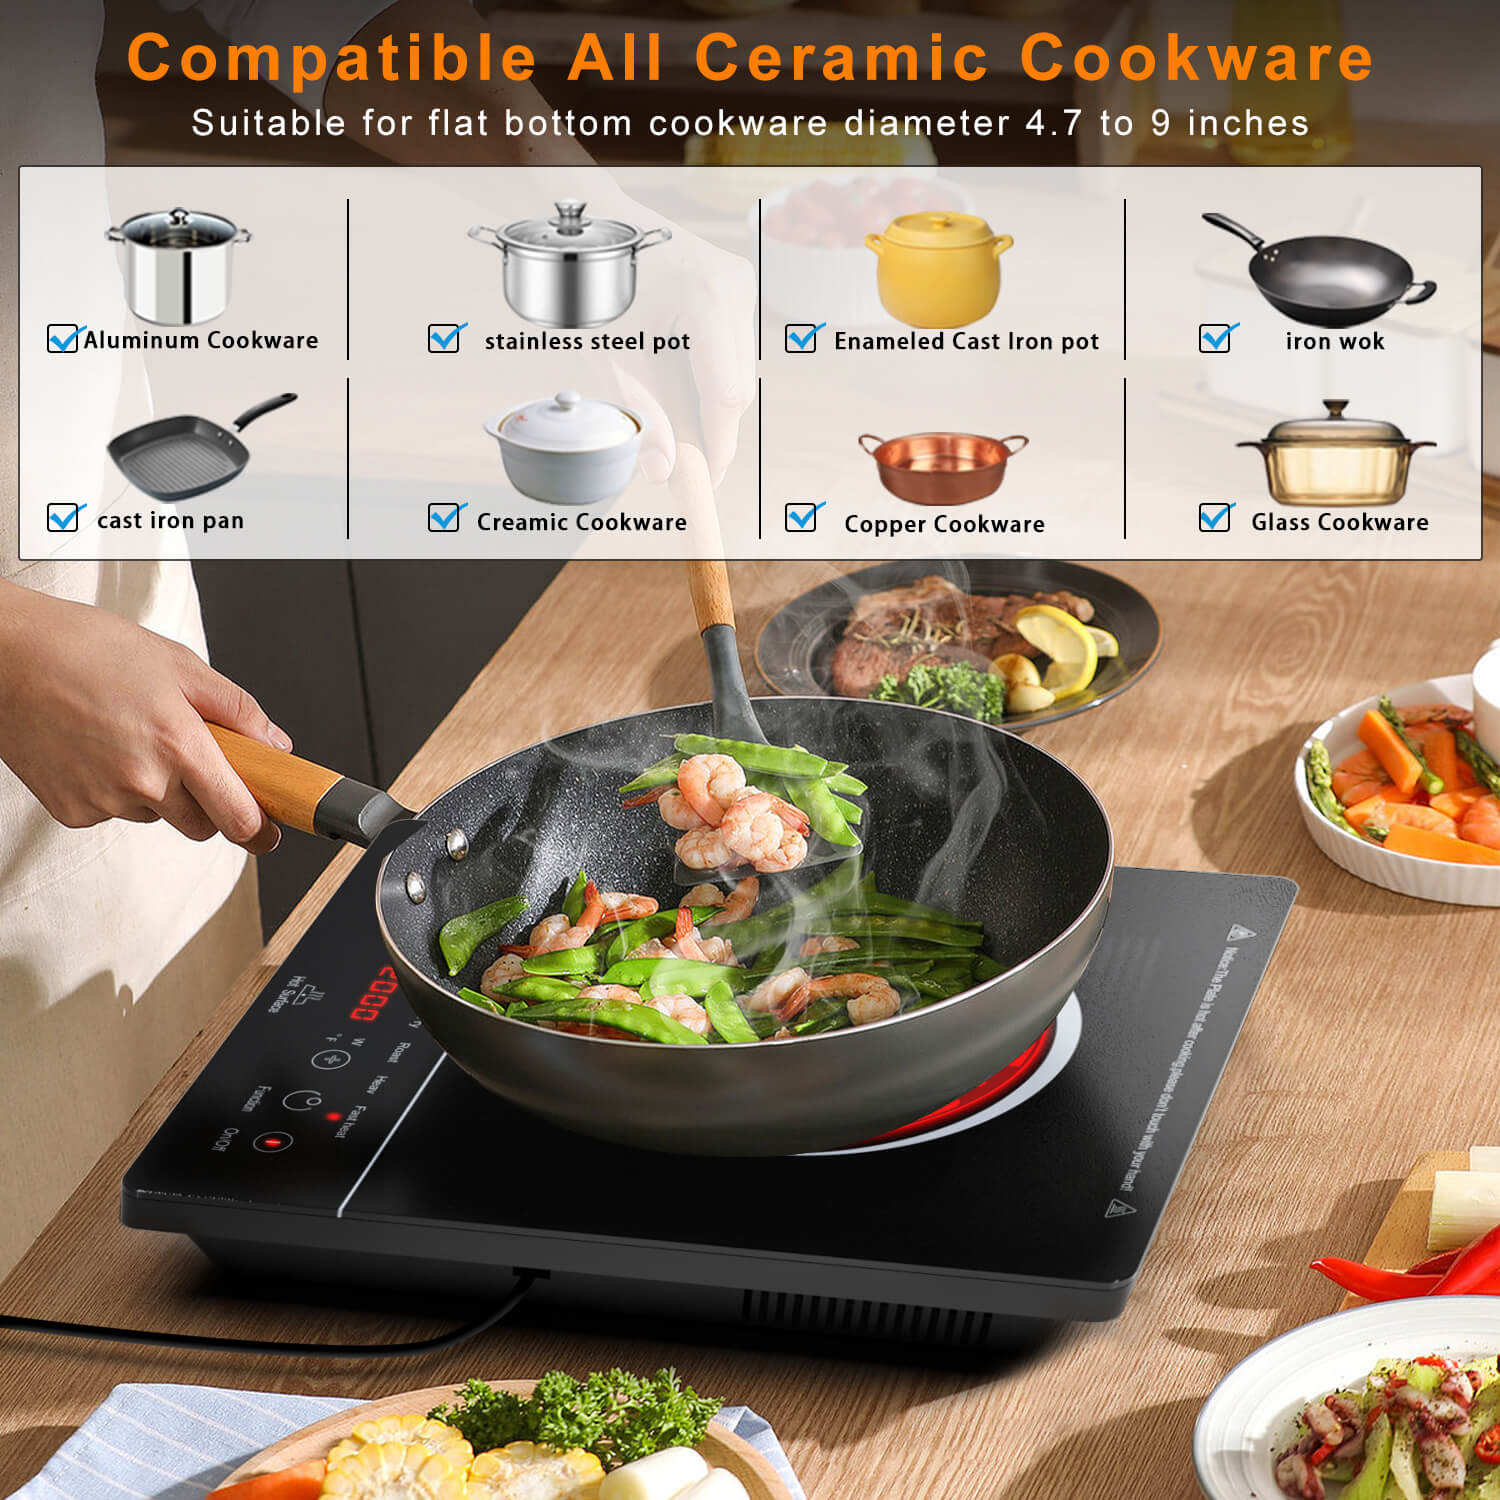 This is an electric ceramic cooktop, its advantage is that it is compatible with any material cookware, such as iron, stainless steel, ceramic, glass, etc. Suitable for pot bottom diameter 4.7 to 9 inches.